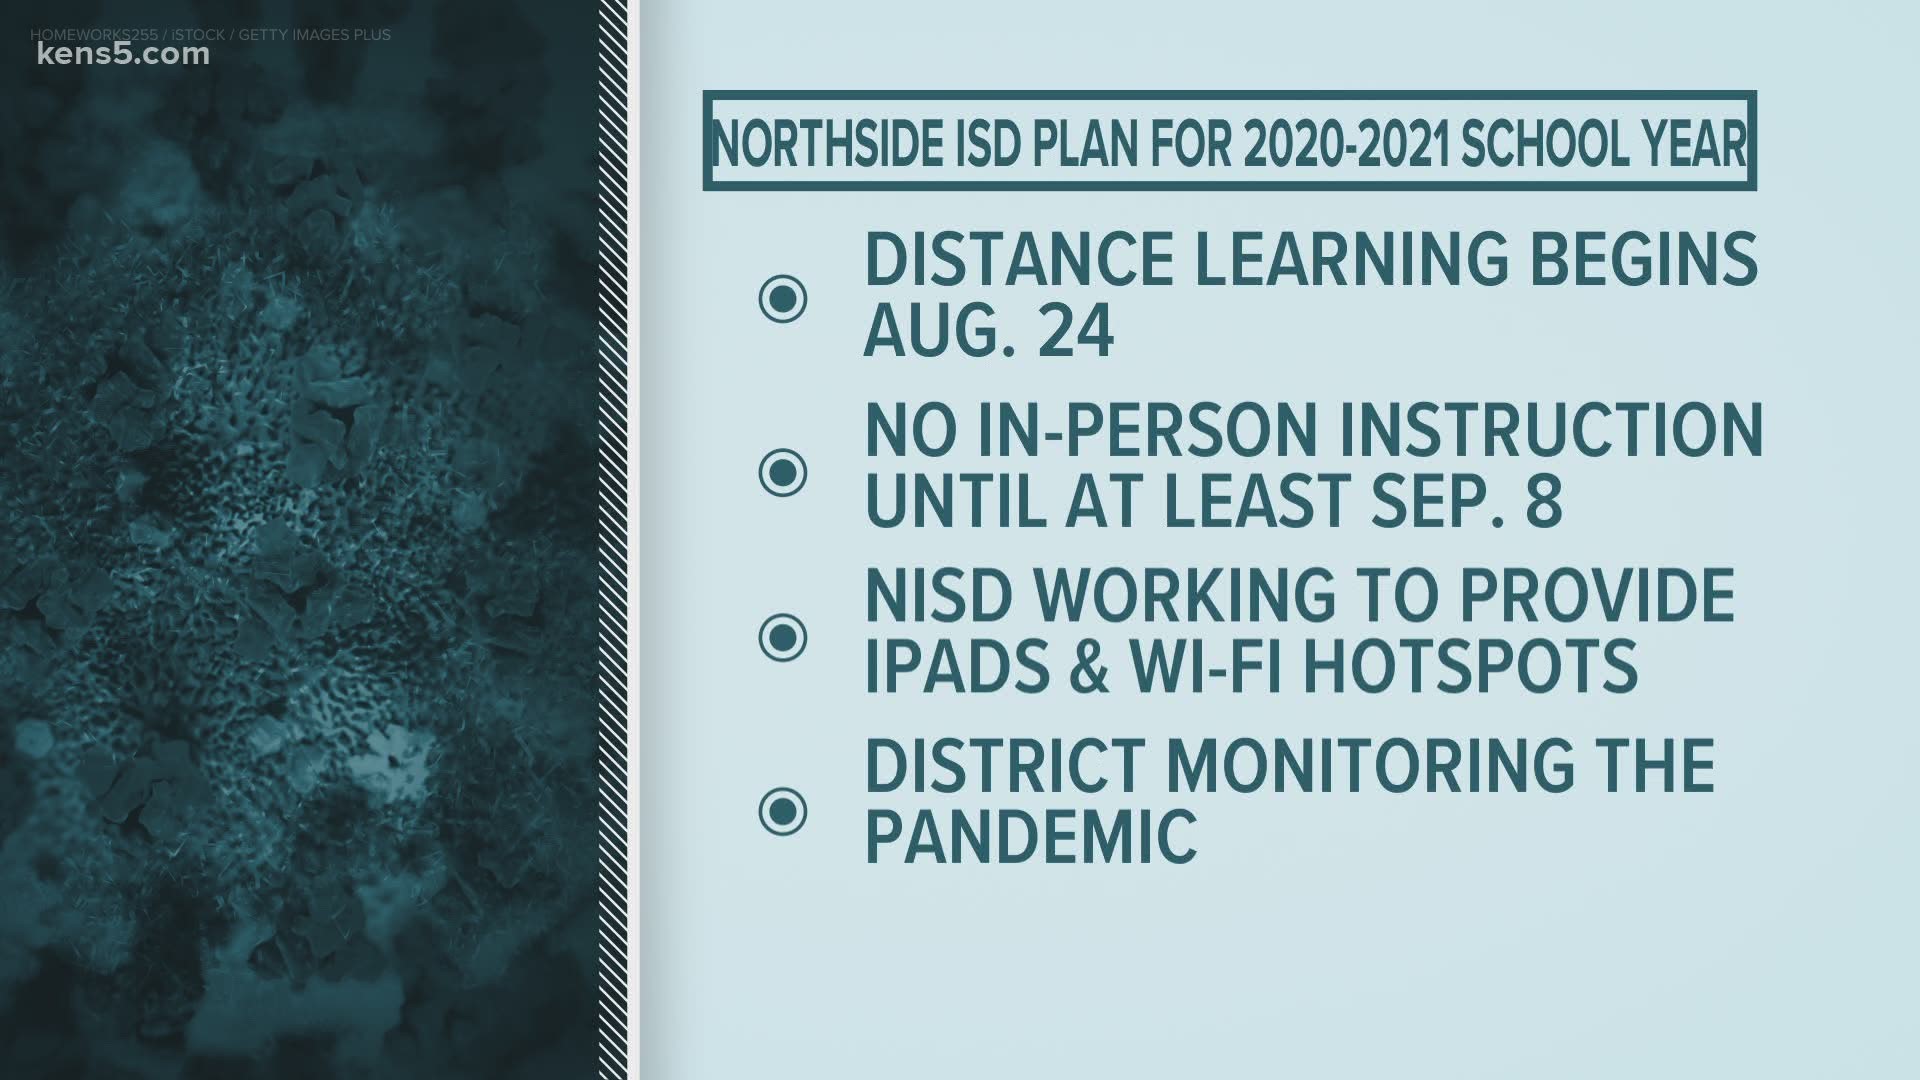 There will be no in-person learning at Northside Independent School District until at least after Labor Day.